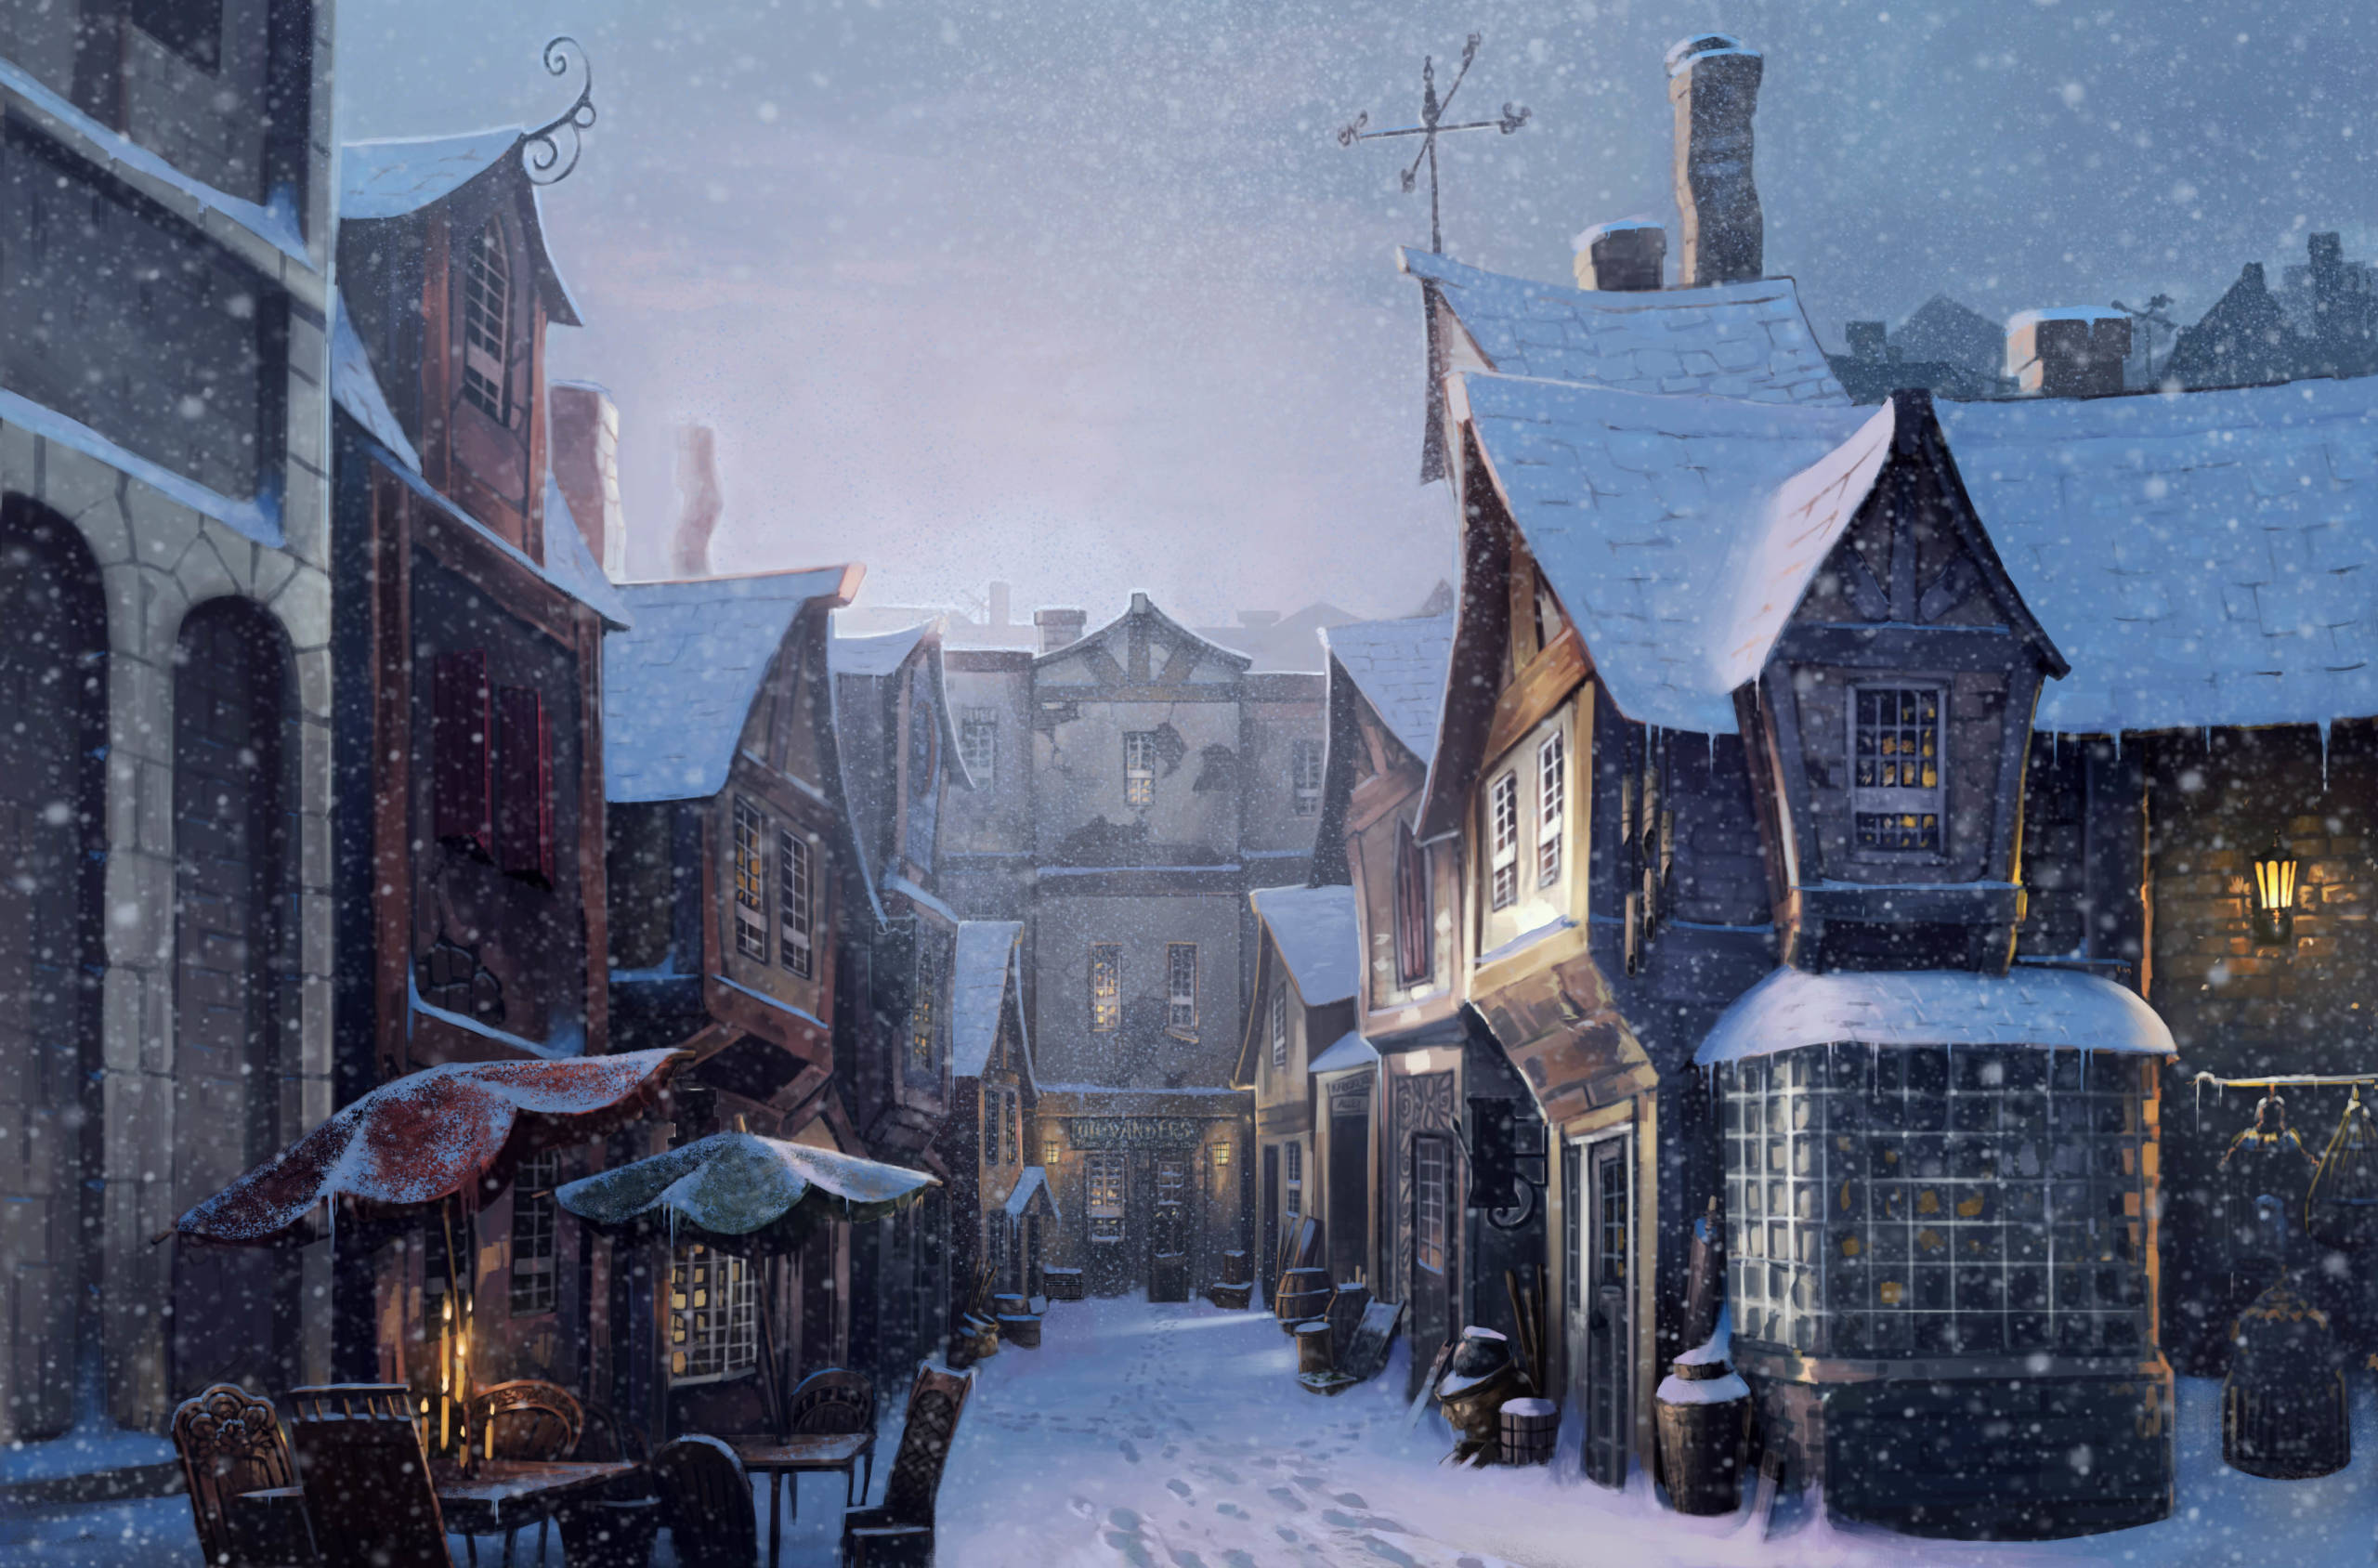 Diagon Alley in the snow